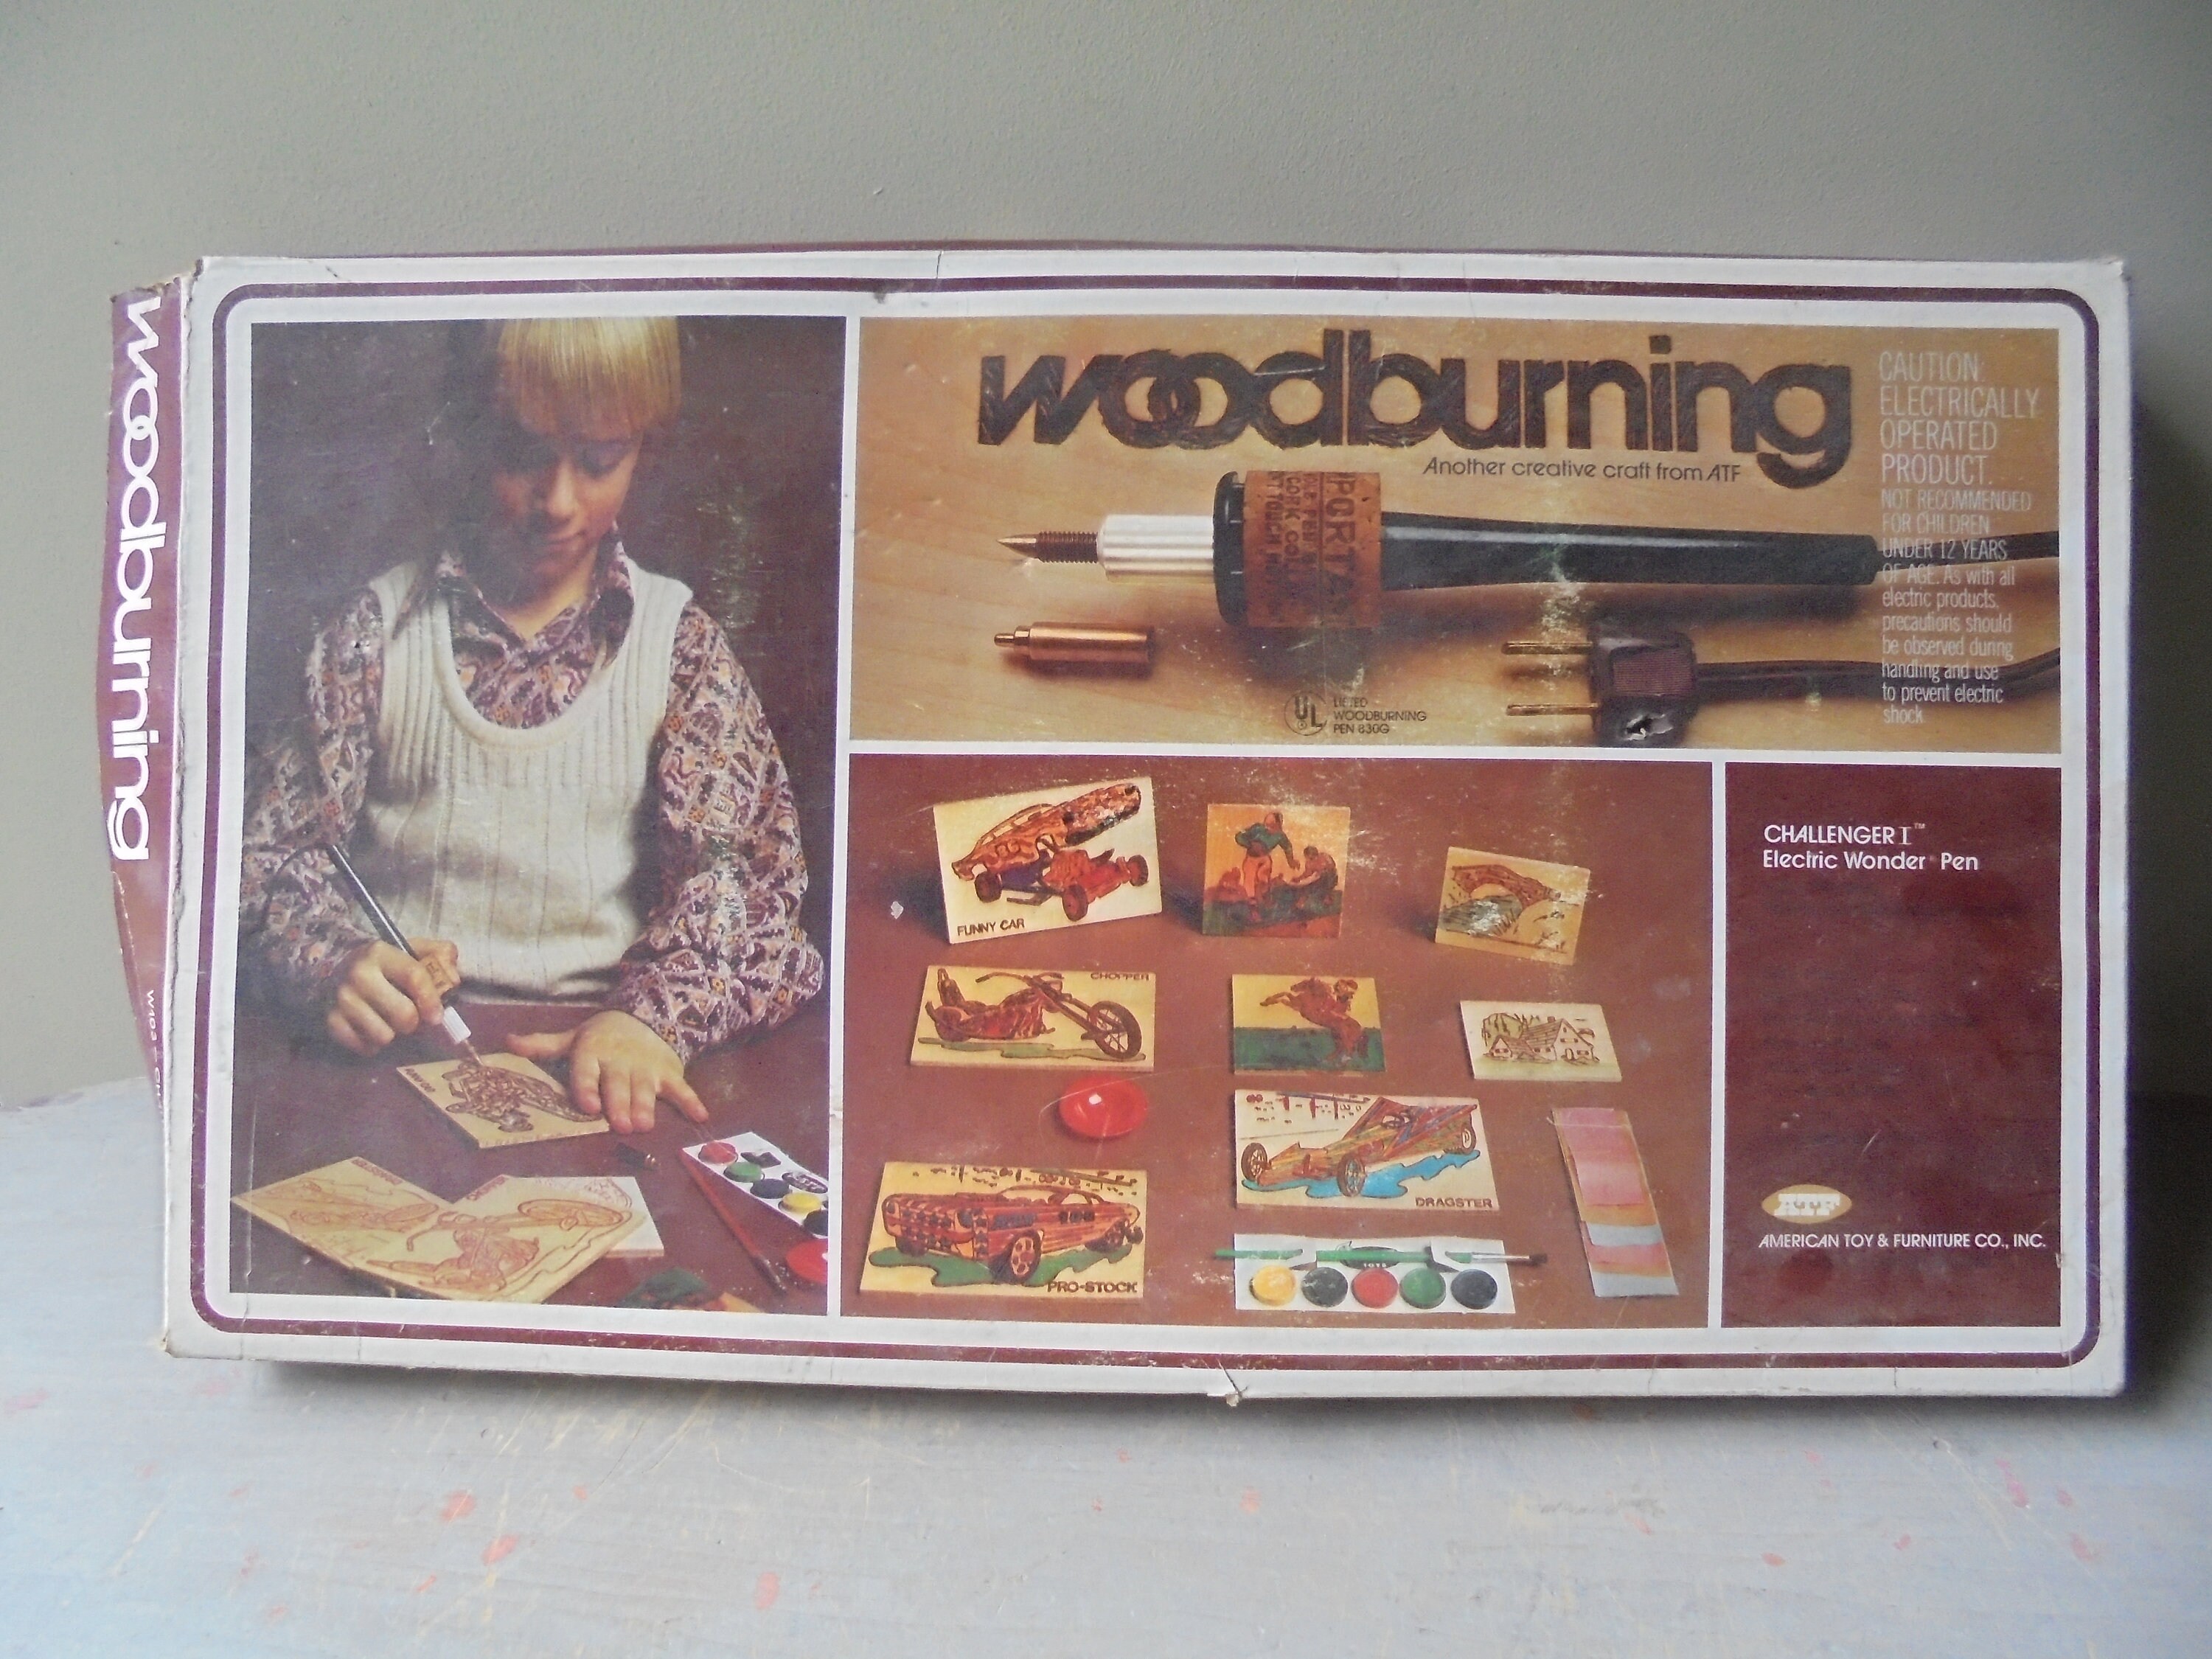 Child Of The 80s & 90s - Wood Burning Kit. They thought it was a